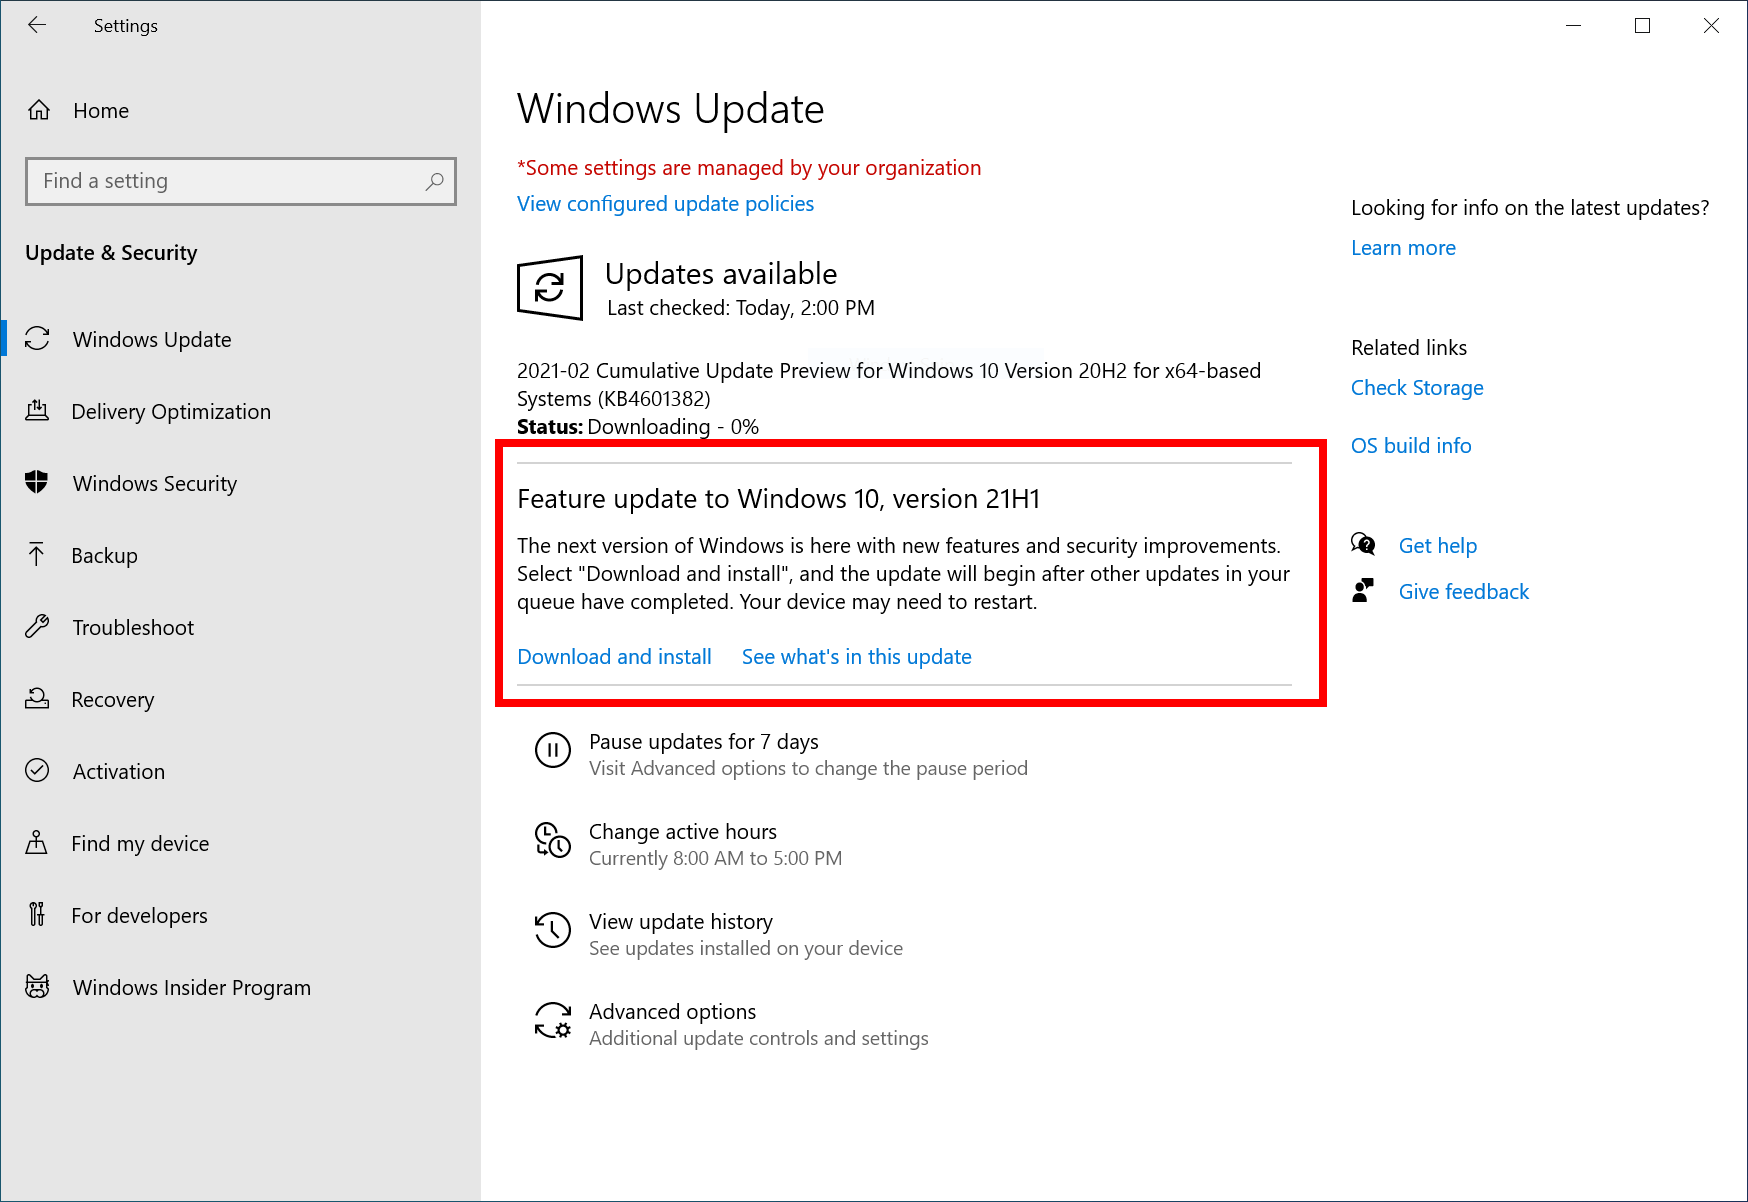 When is Windows 10 version 21H1 going to be released? windows-10-version-21h1-feature-update.png